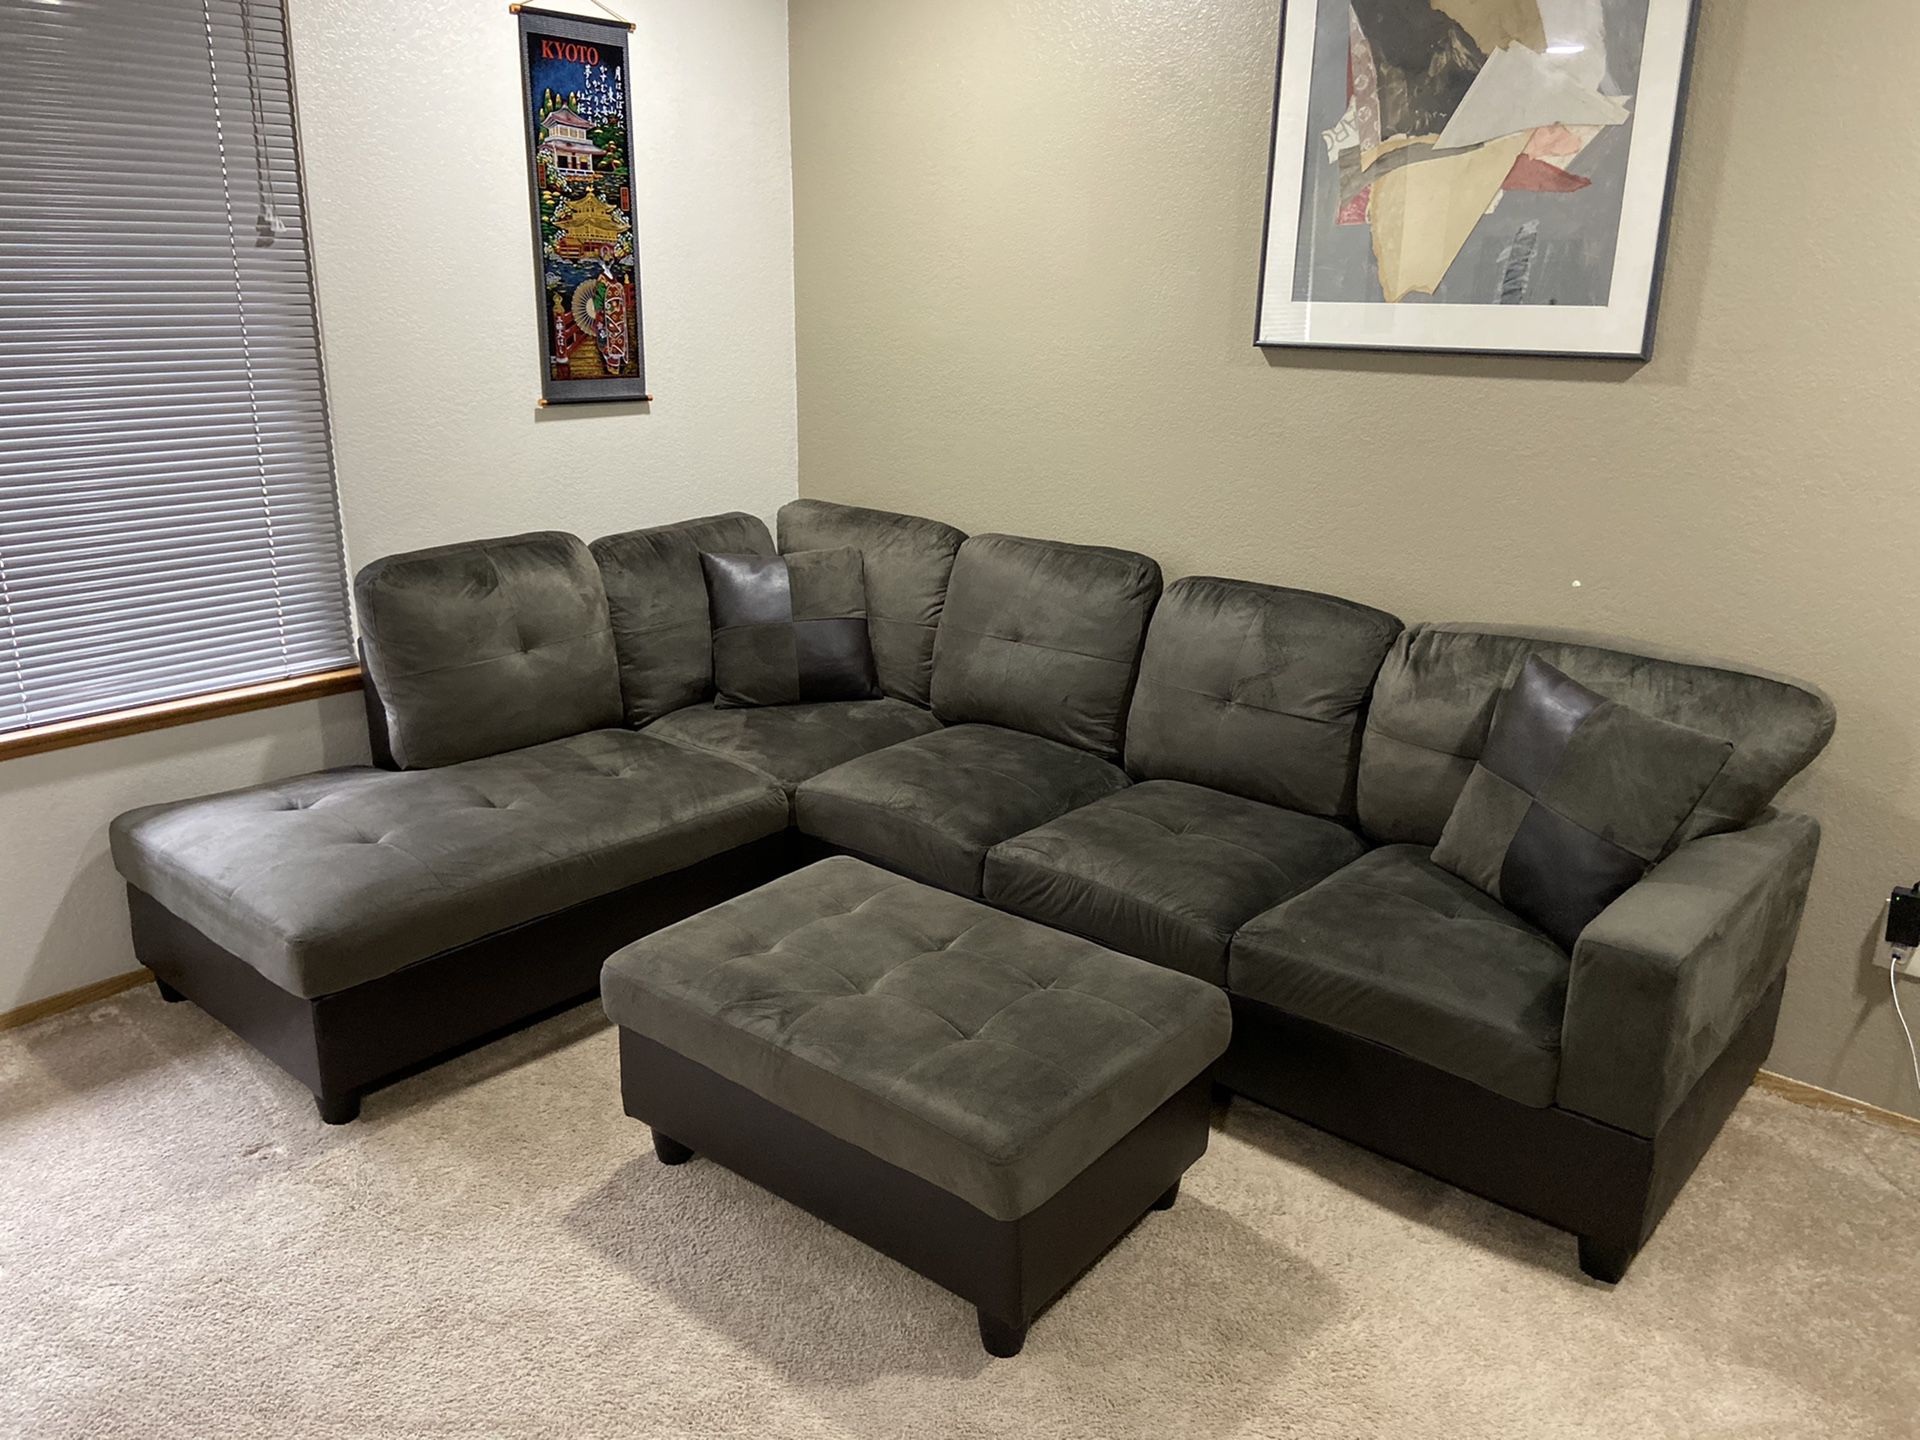 2 Month Old Gray Microfiber Sectional Couch with Storage Ottoman and Pillows Excellent Condition - Like New!!!